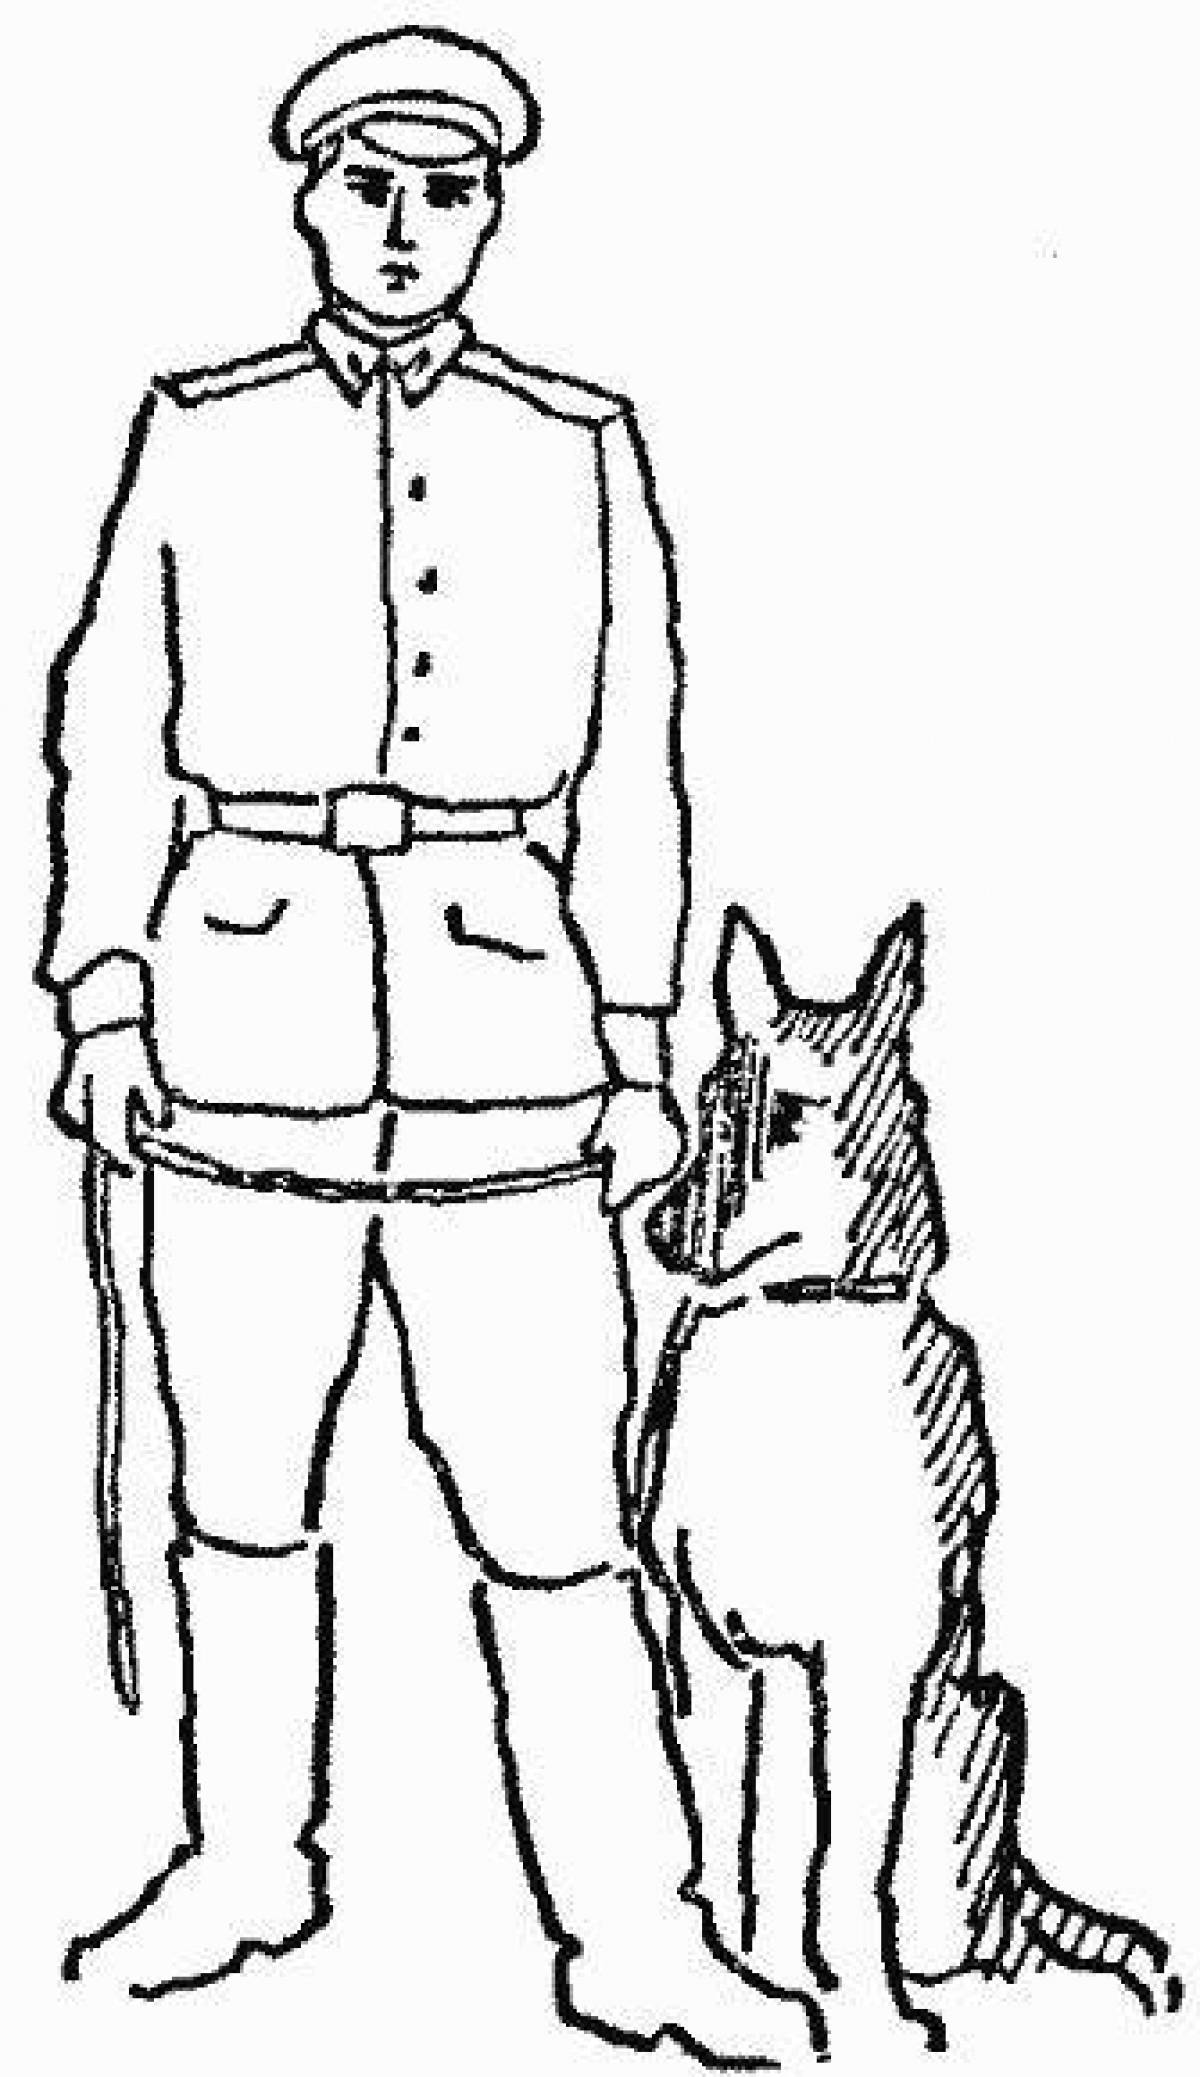 Valorous border guard with a dog